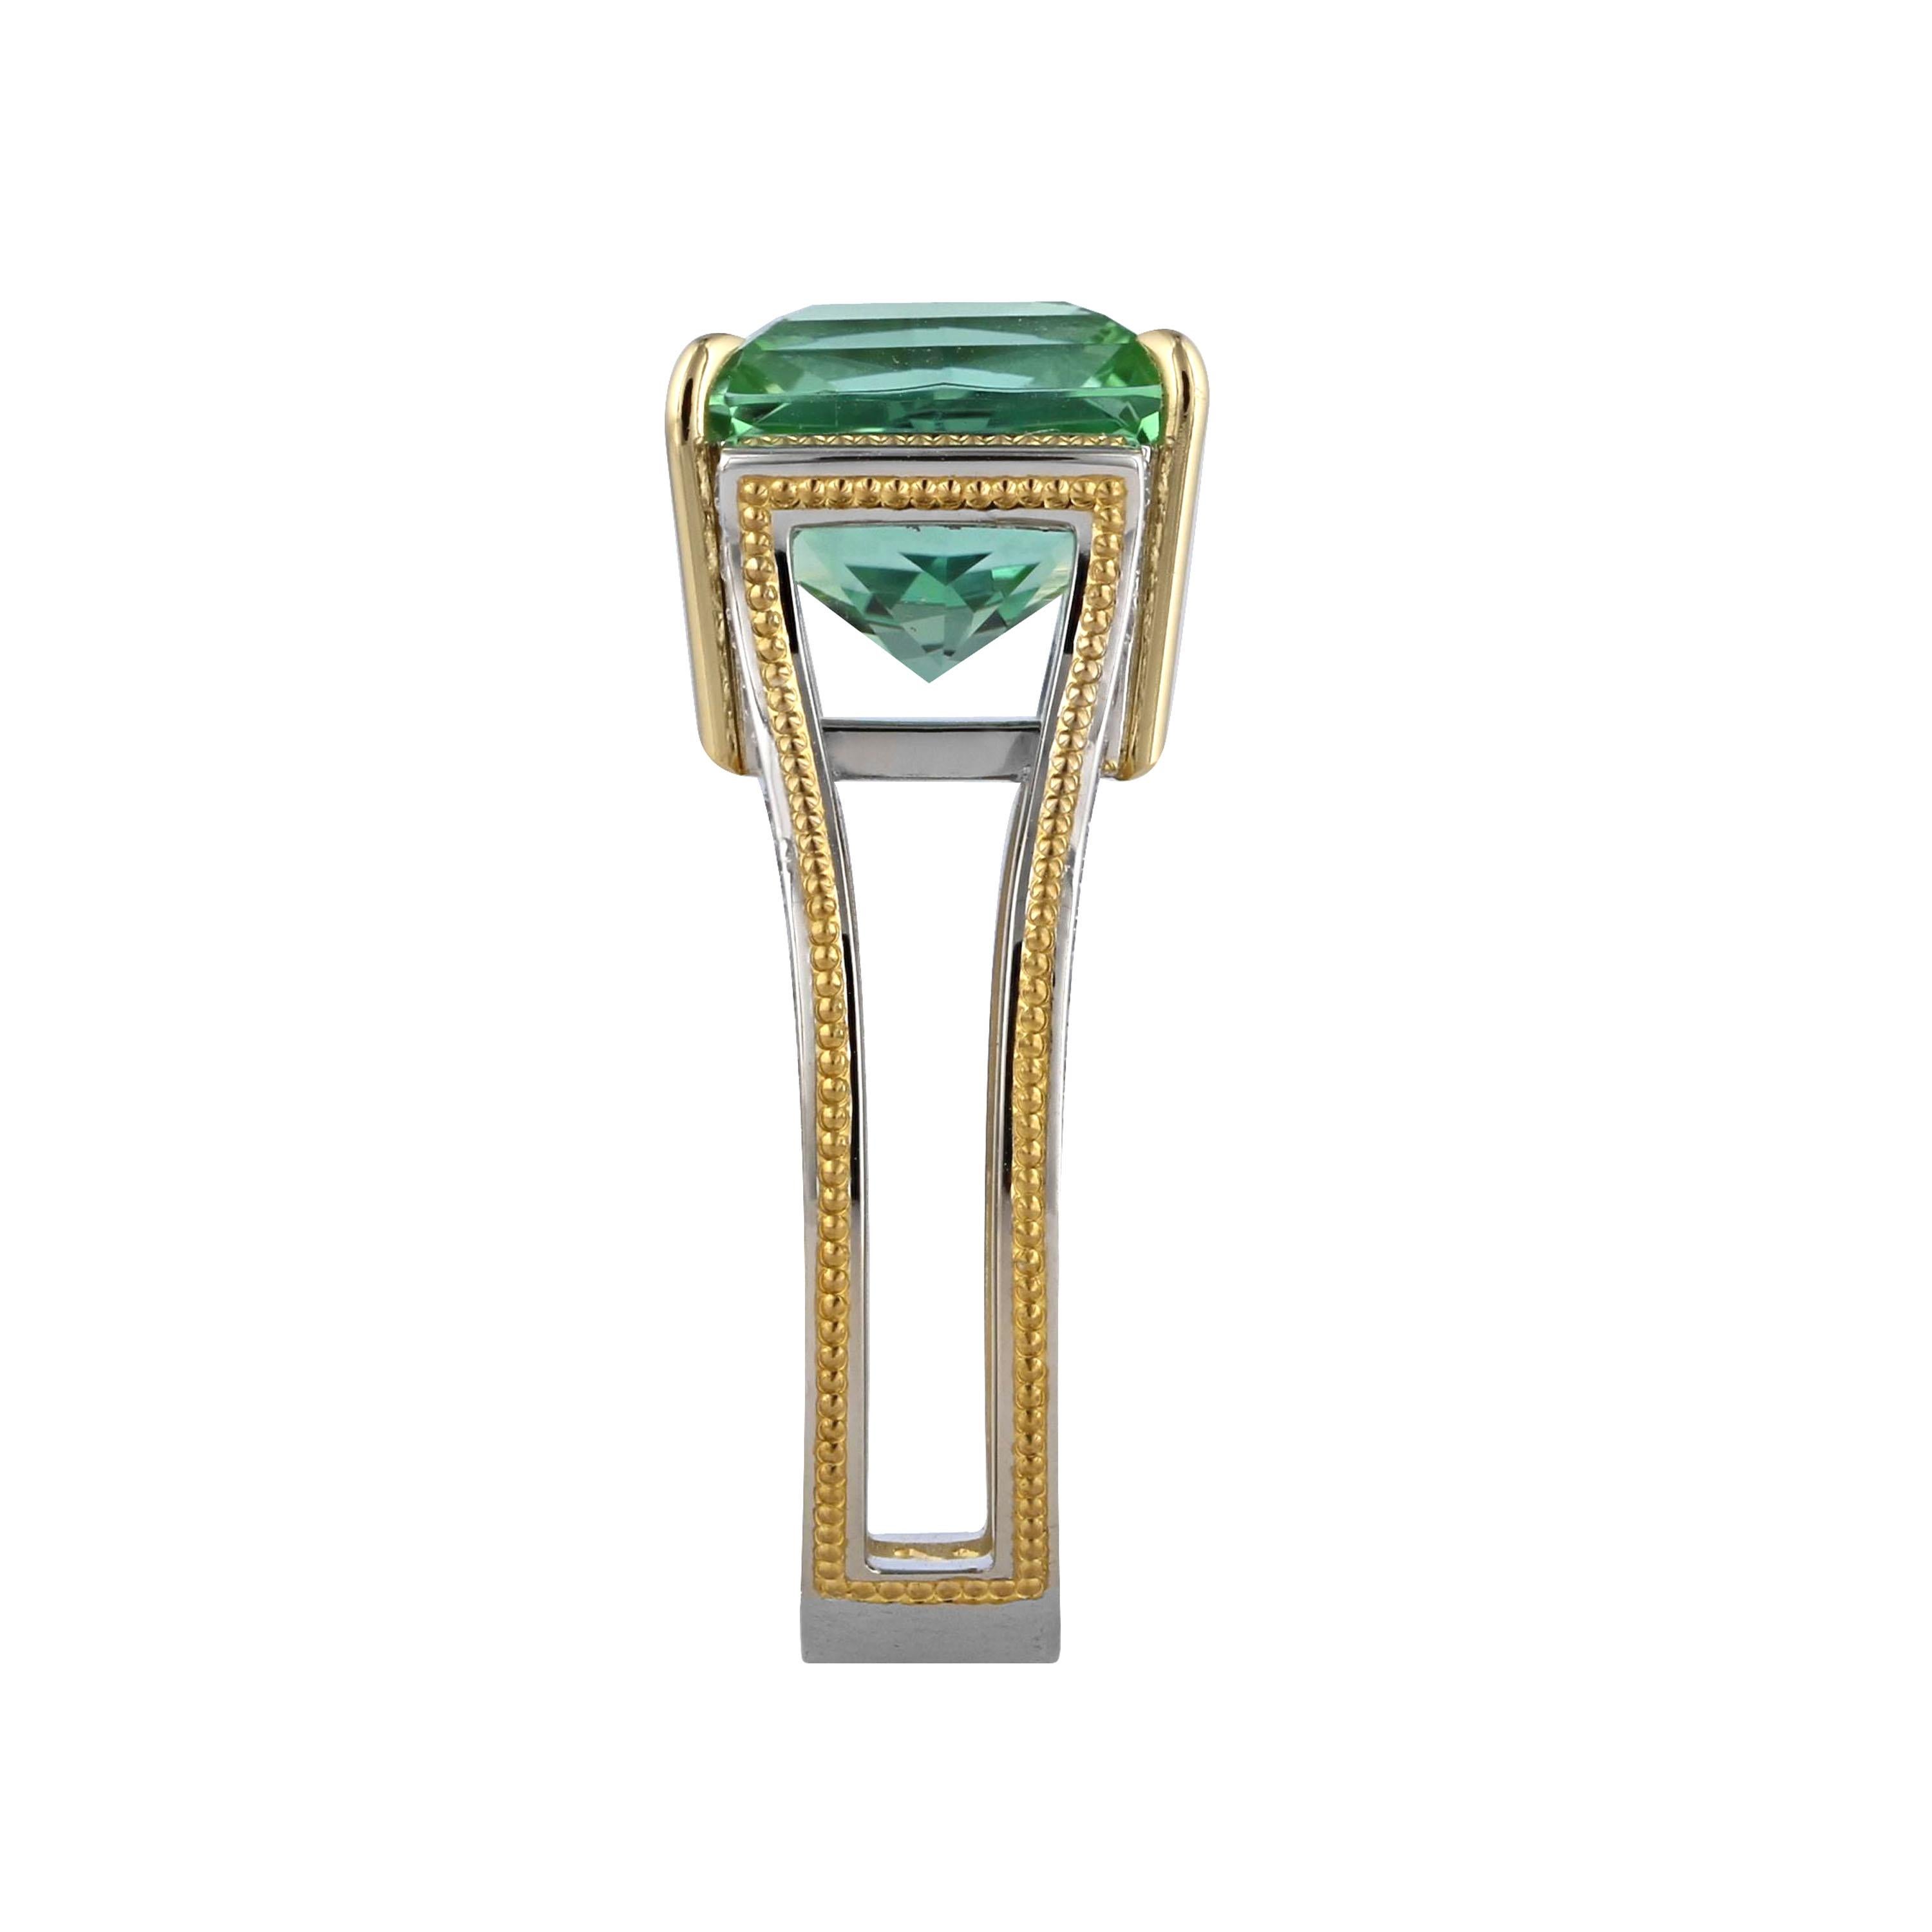 Spectacular 5.80 ct. teal colored Tourmaline set in Platinum and accented with seventy-two round brilliant diamonds with a total weight of .58 ct. of DEF color/ Internally Flawless to VVS clarity Ideal cut Diamonds. 18K Gold prongs and 24K Gold